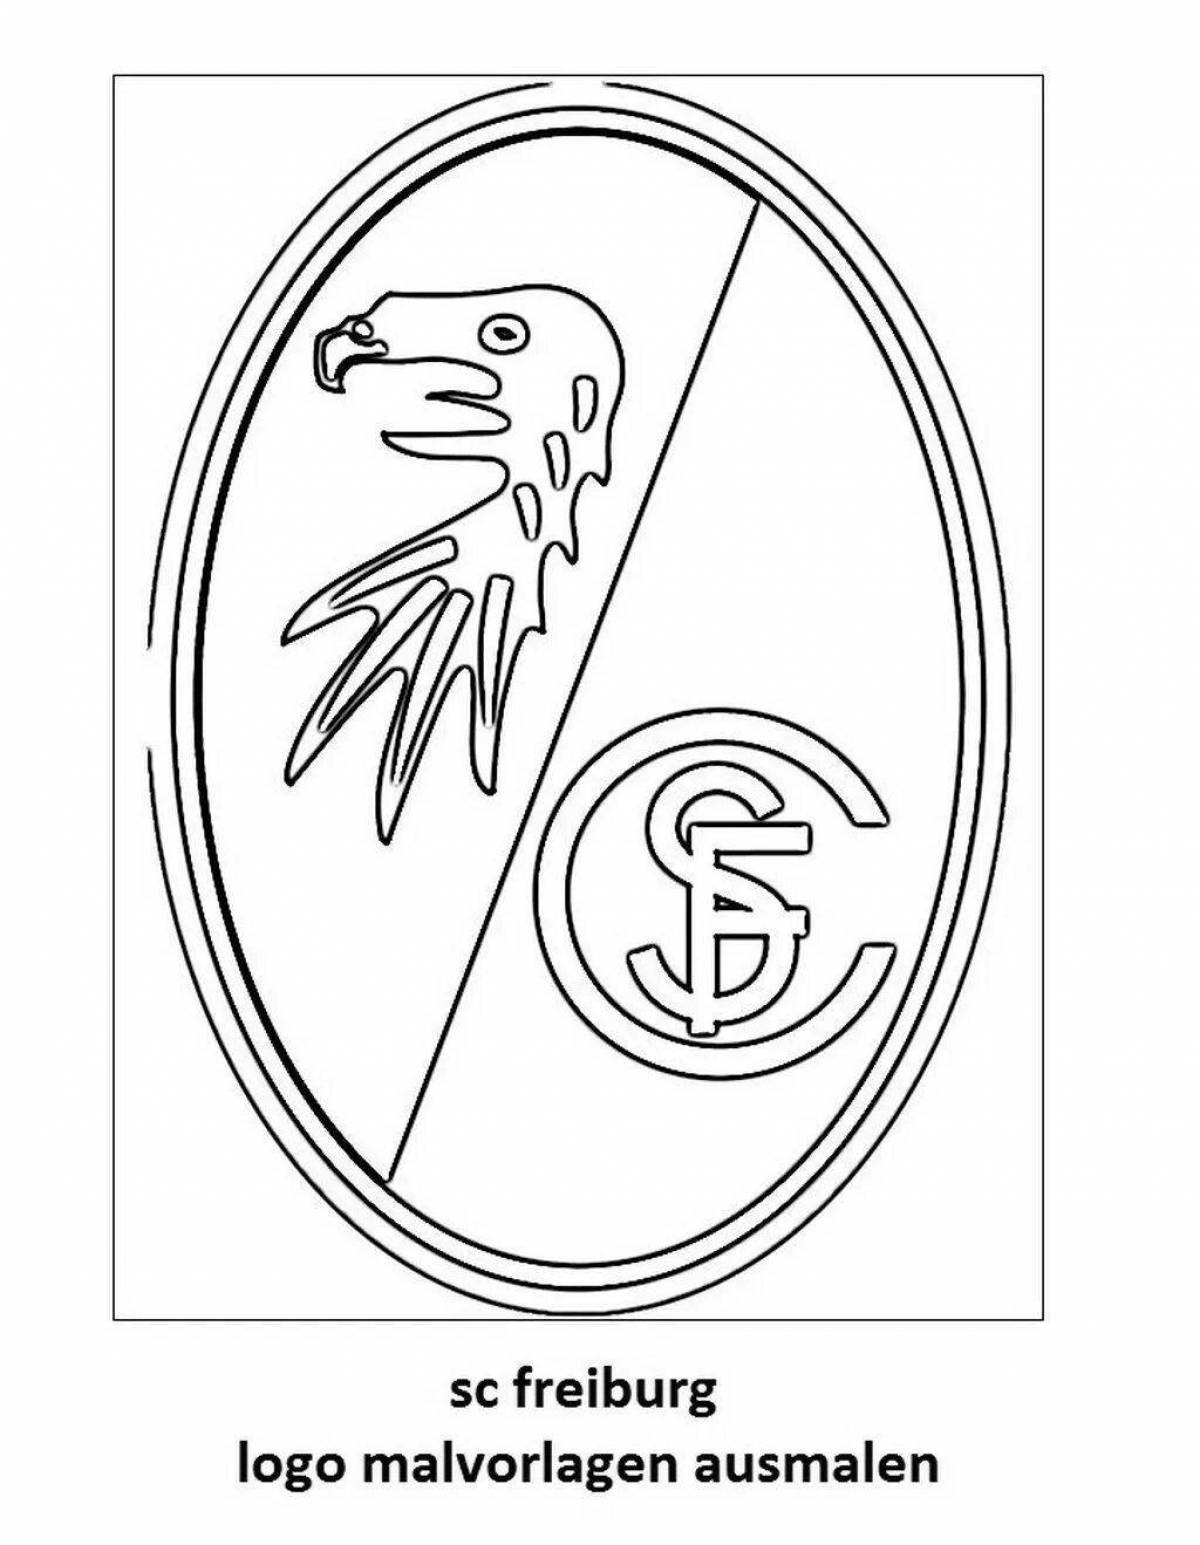 Coloring pages for football club emblems